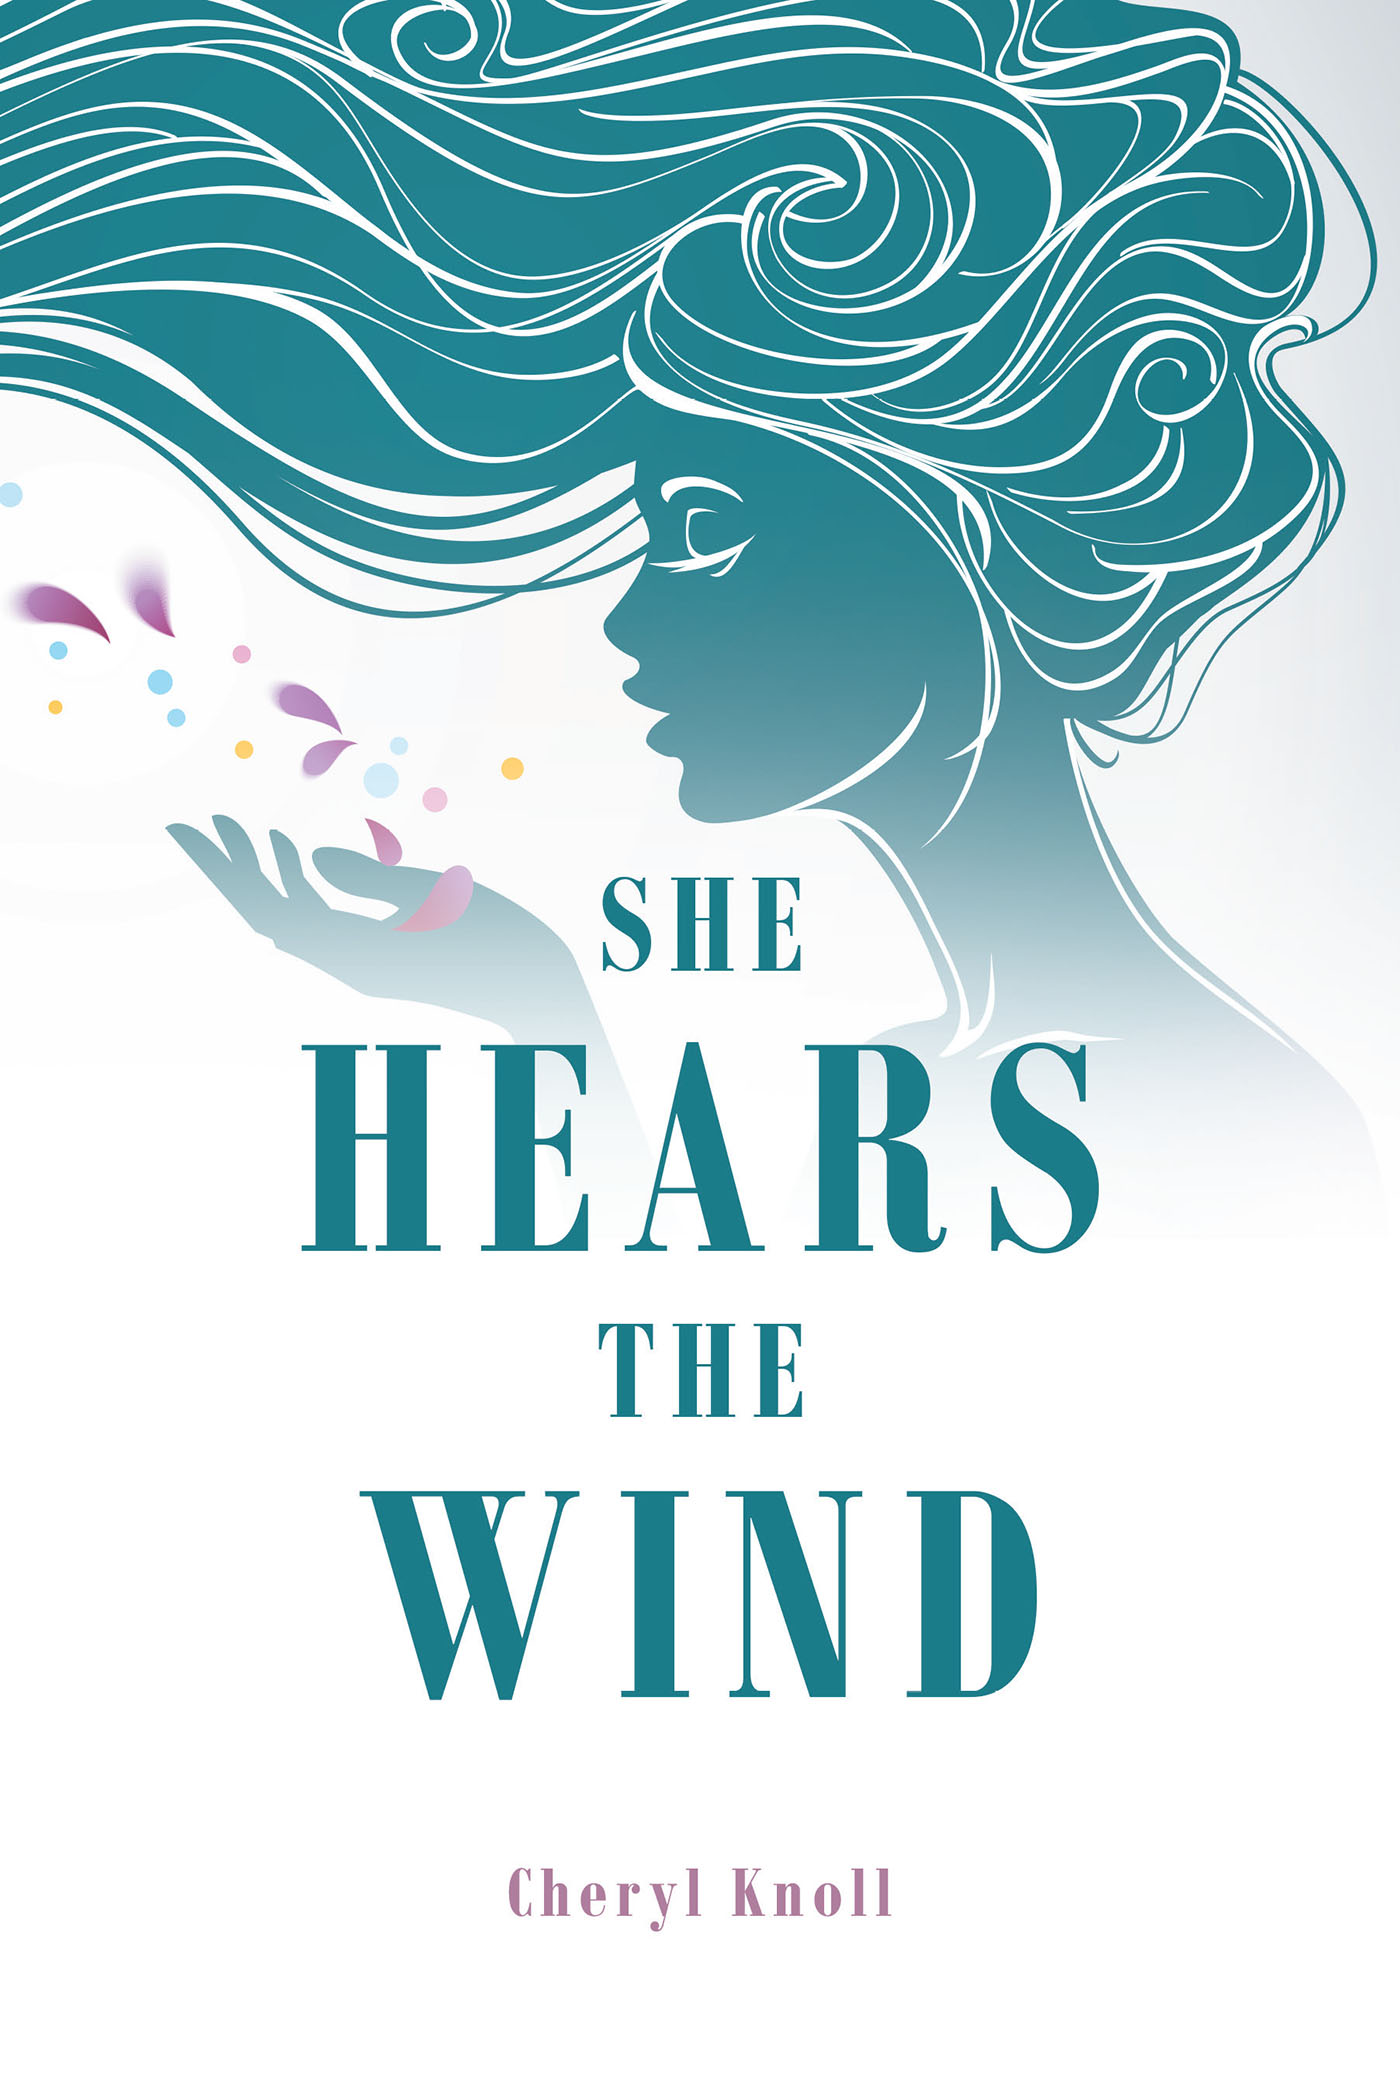 Author Cheryl Knoll’s New Book, "She Hears the Wind," is a Compelling and Heartfelt Book of Poetry Inspired by the Unique Beauty and Grace of the Wind